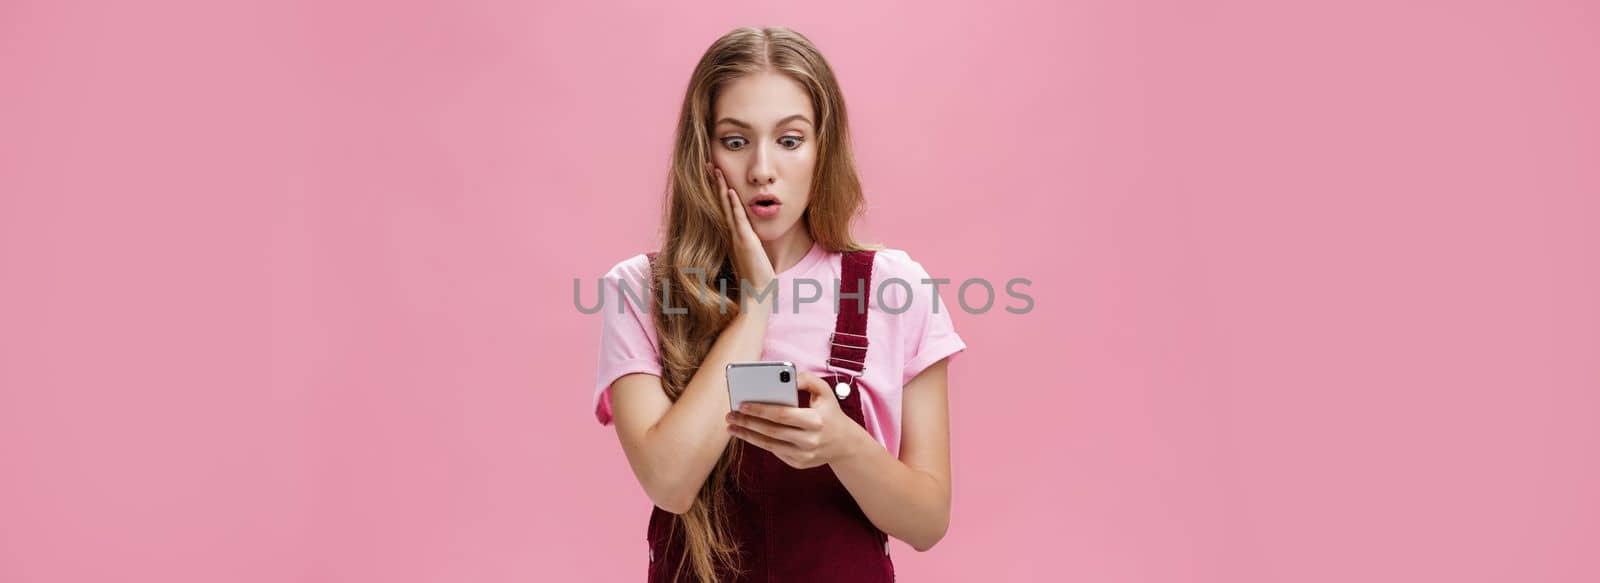 Girl found out shocking truth after reading message in smartphone pressing arm to cheek in surprise staring concerned and speechless at cellphone screen reacting to unexpected news over pink wall. Technology, emotions concept